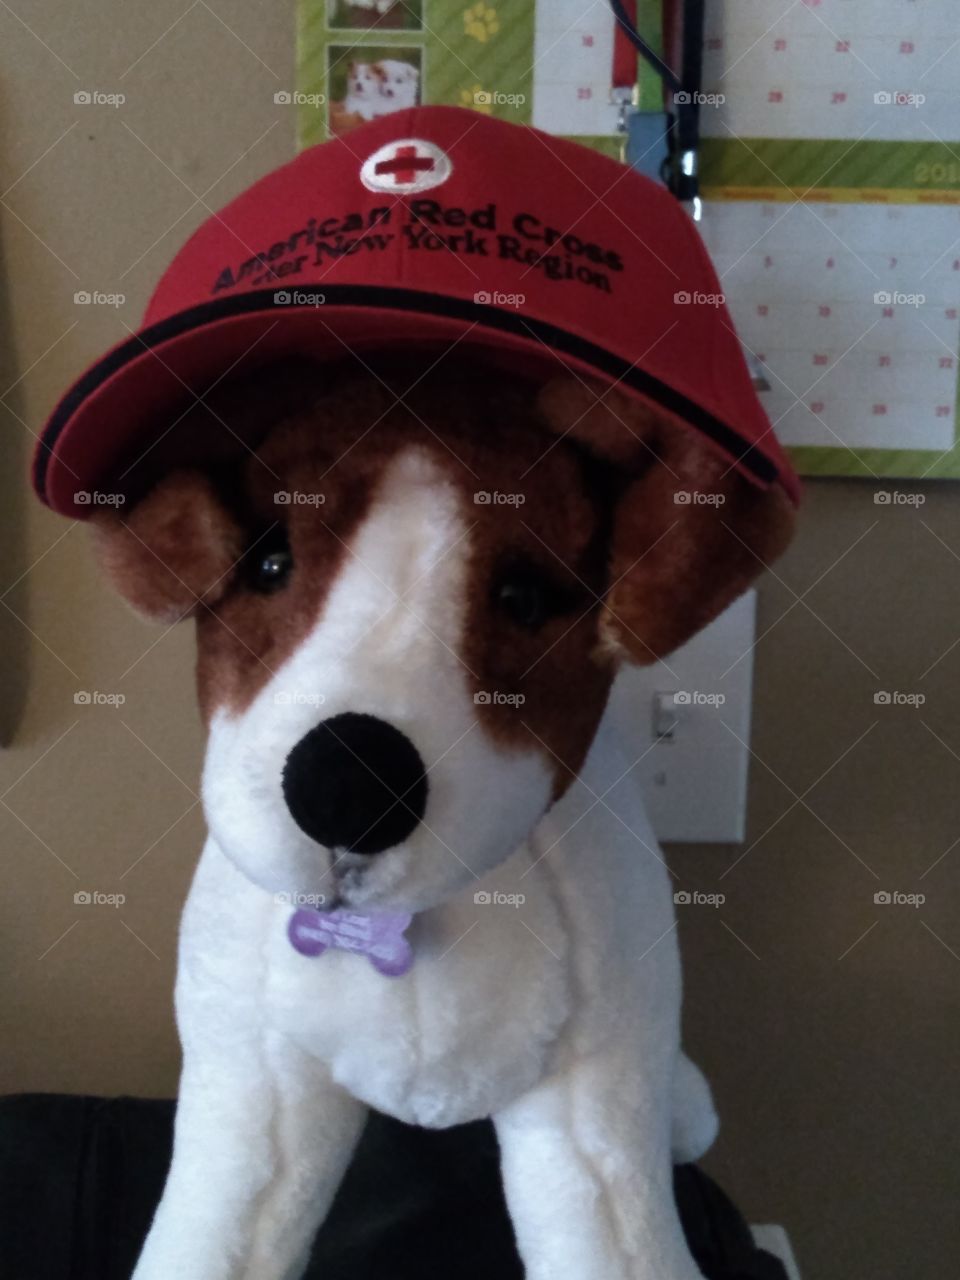 Stuffed animal with American Red Cross hat.